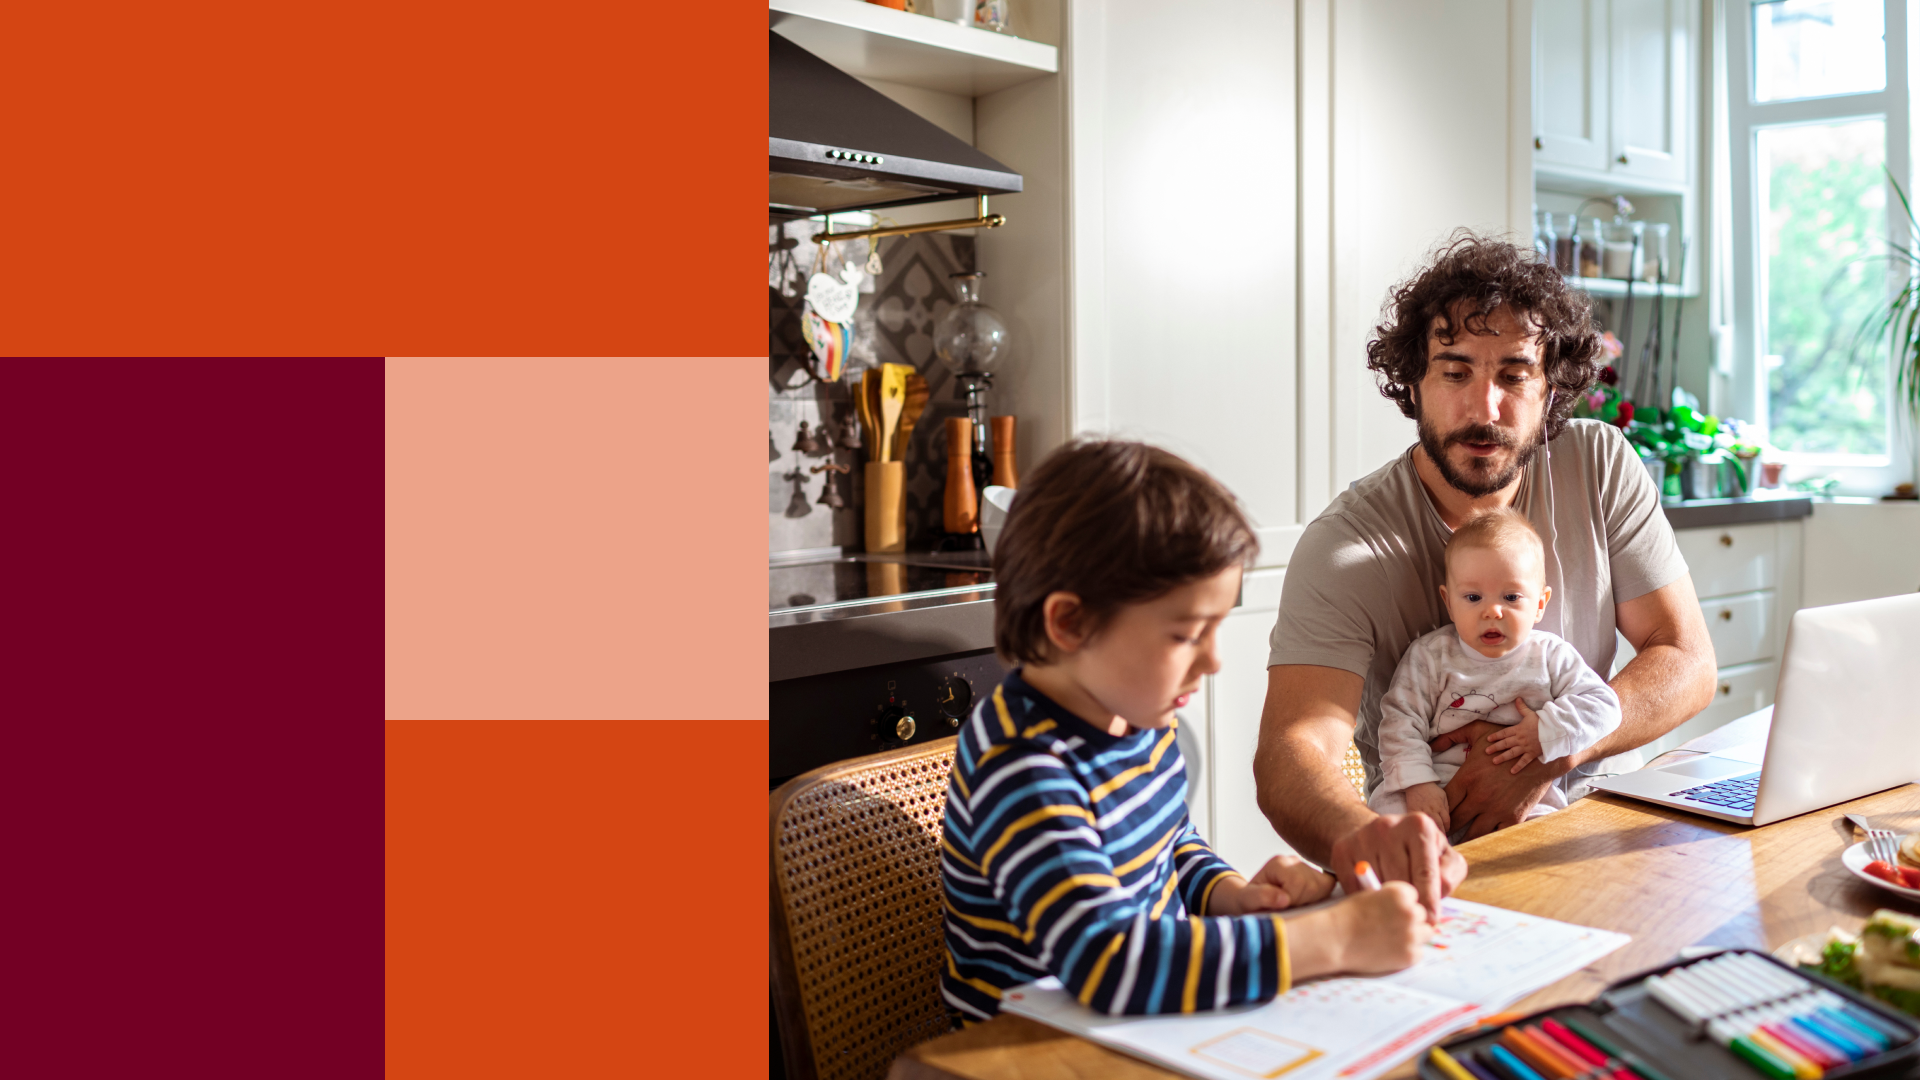 image with abstract orange and maroon blocks on left side, right side is a man with a baby in his lap helping a young child with homework at the kitchen table